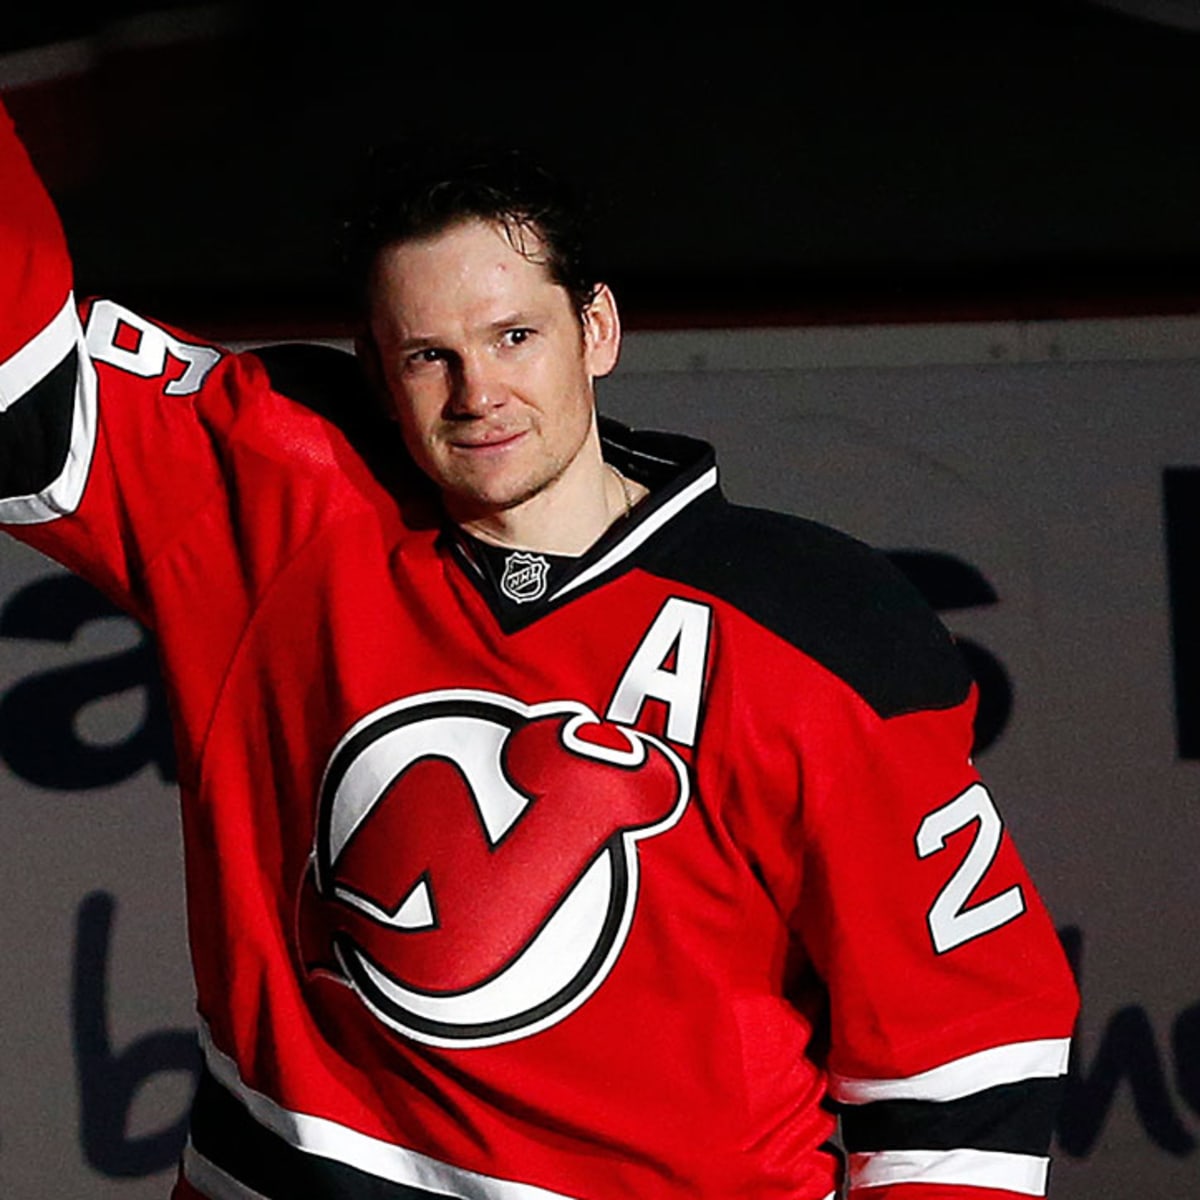 New Jersey Devils Patrik Elias Official Red Old Time Hockey